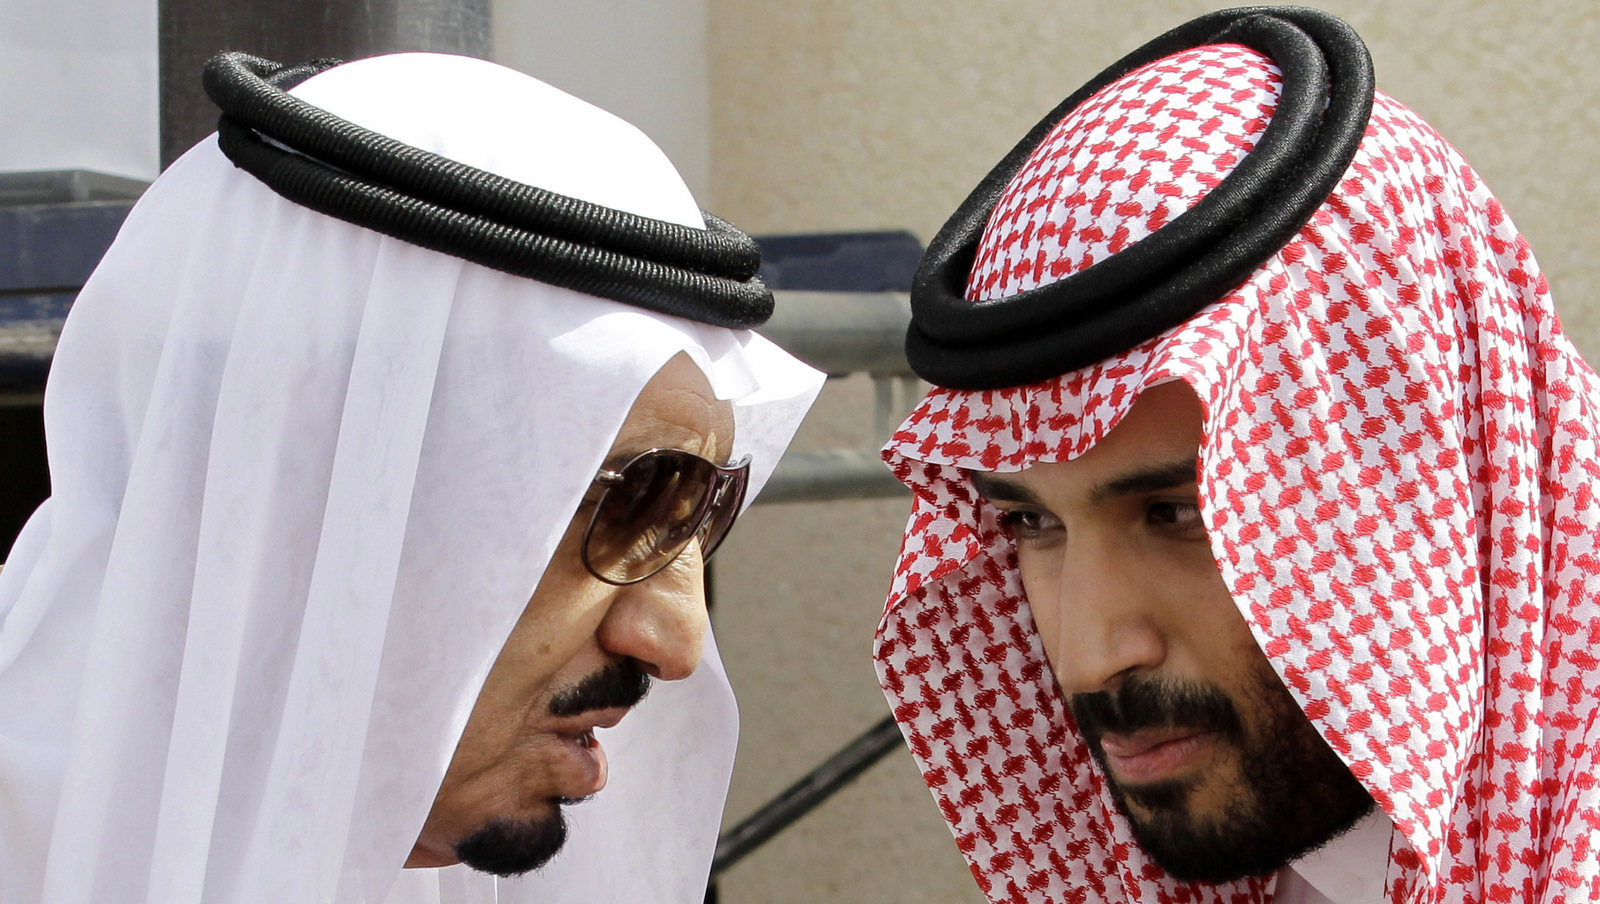 In this Monday, May 14, 2012 file  photo, then Crown Prince Salman, left, speaks with his son Prince Mohammed bin Salman as they wait for Gulf Arab leaders ahead of the opening of a Gulf Cooperation Council summit, in Riyadh, Saudi Arabia. On Wednesday, April 29, 2015, Prince Mohammed was appointed deputy crown prince, placing him second in line for the crown. He is believed to be around 30 years old, and as defense minister has assumed a leading role in the Saudi-led air campaign against Shiite rebels in Yemen. (AP Photo/Hassan Ammar, File)